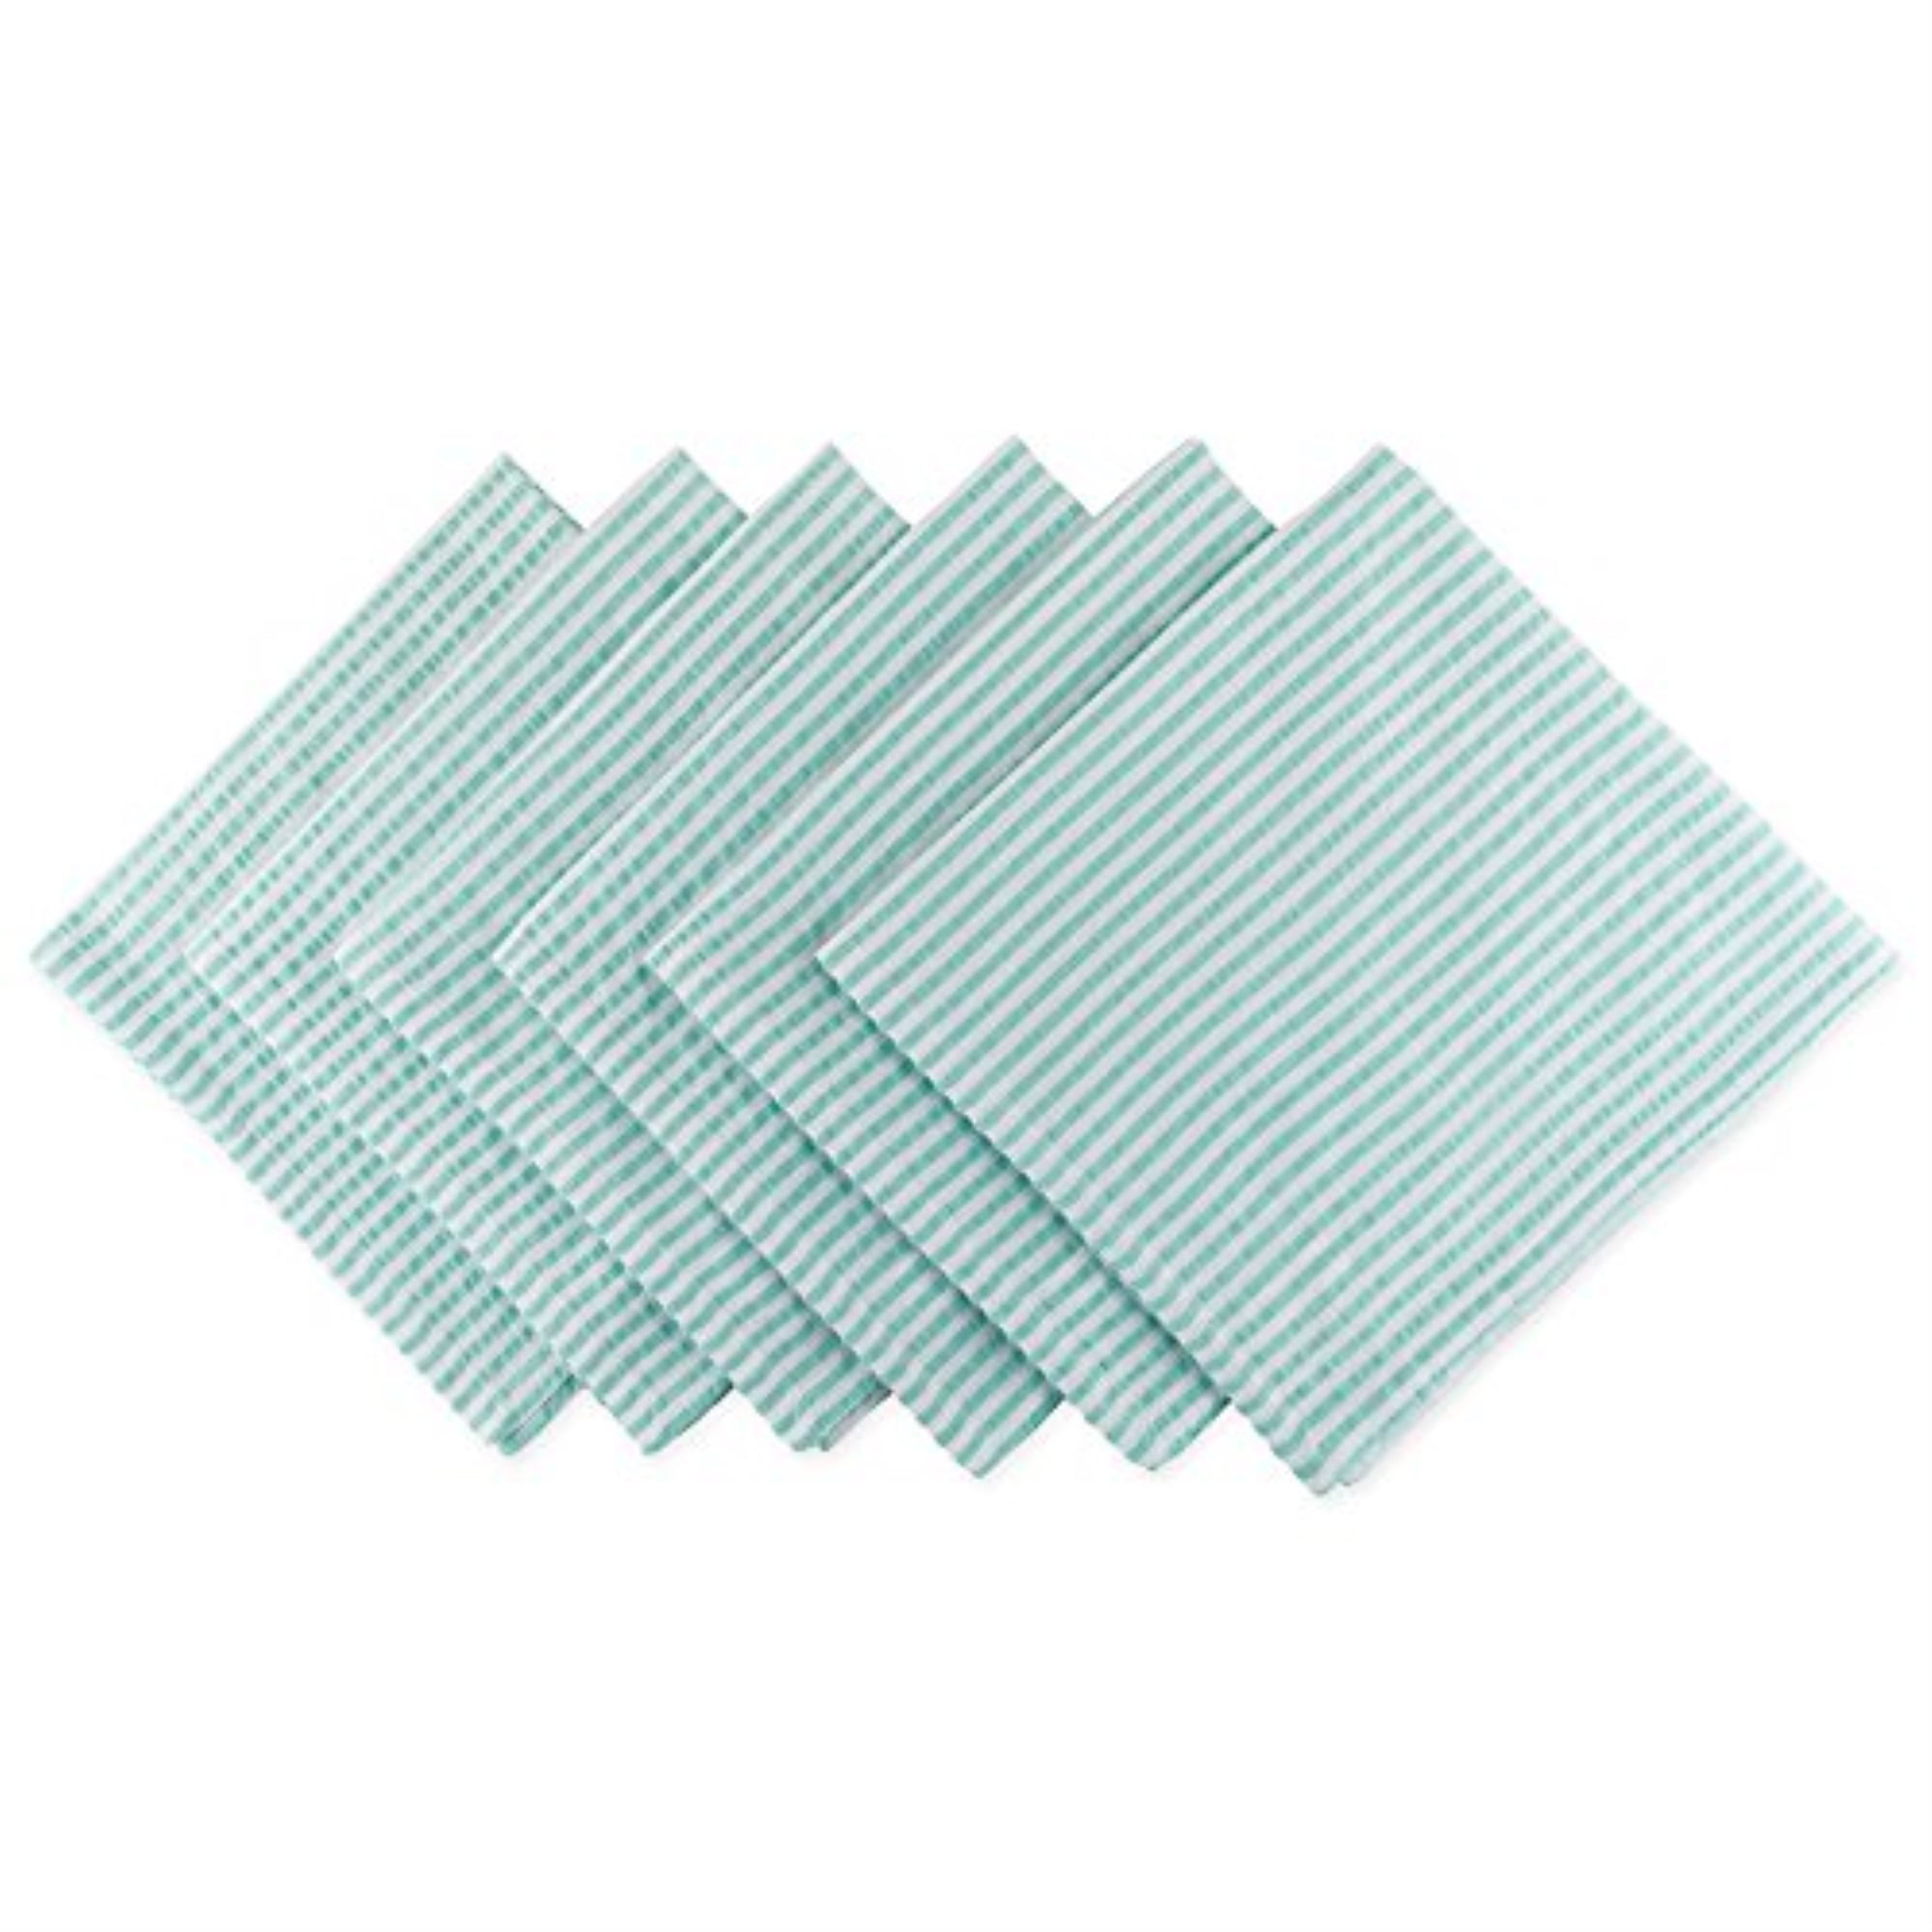 Cloth Napkins Set of 2 DII Basics Lagoon Solid Teal Green/Blue 20x20 inches 